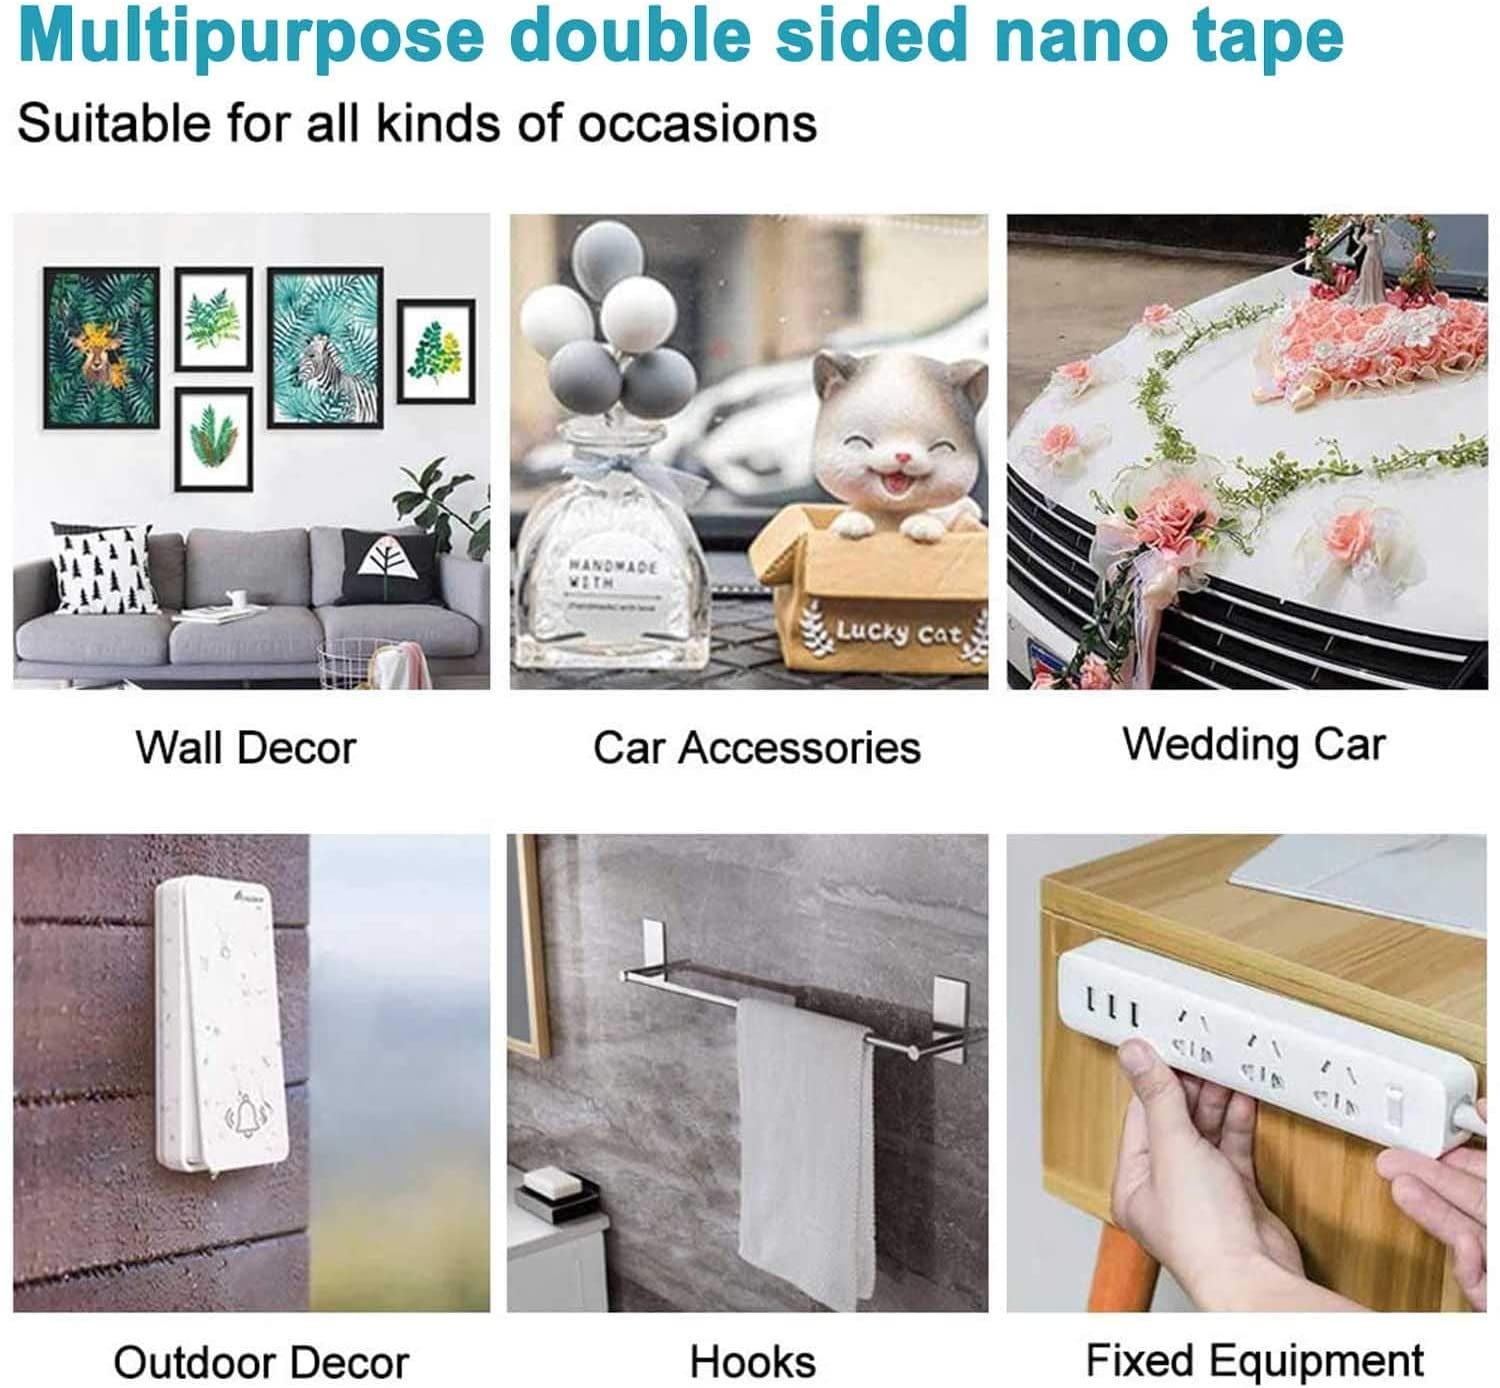 Double Sided Nano Tape Heavy Duty Adhesive 16.5ft - Multipurpose Wall Tape Removable Mounting Tape, Clear Gel Strip Washable Strong Sticky Poster